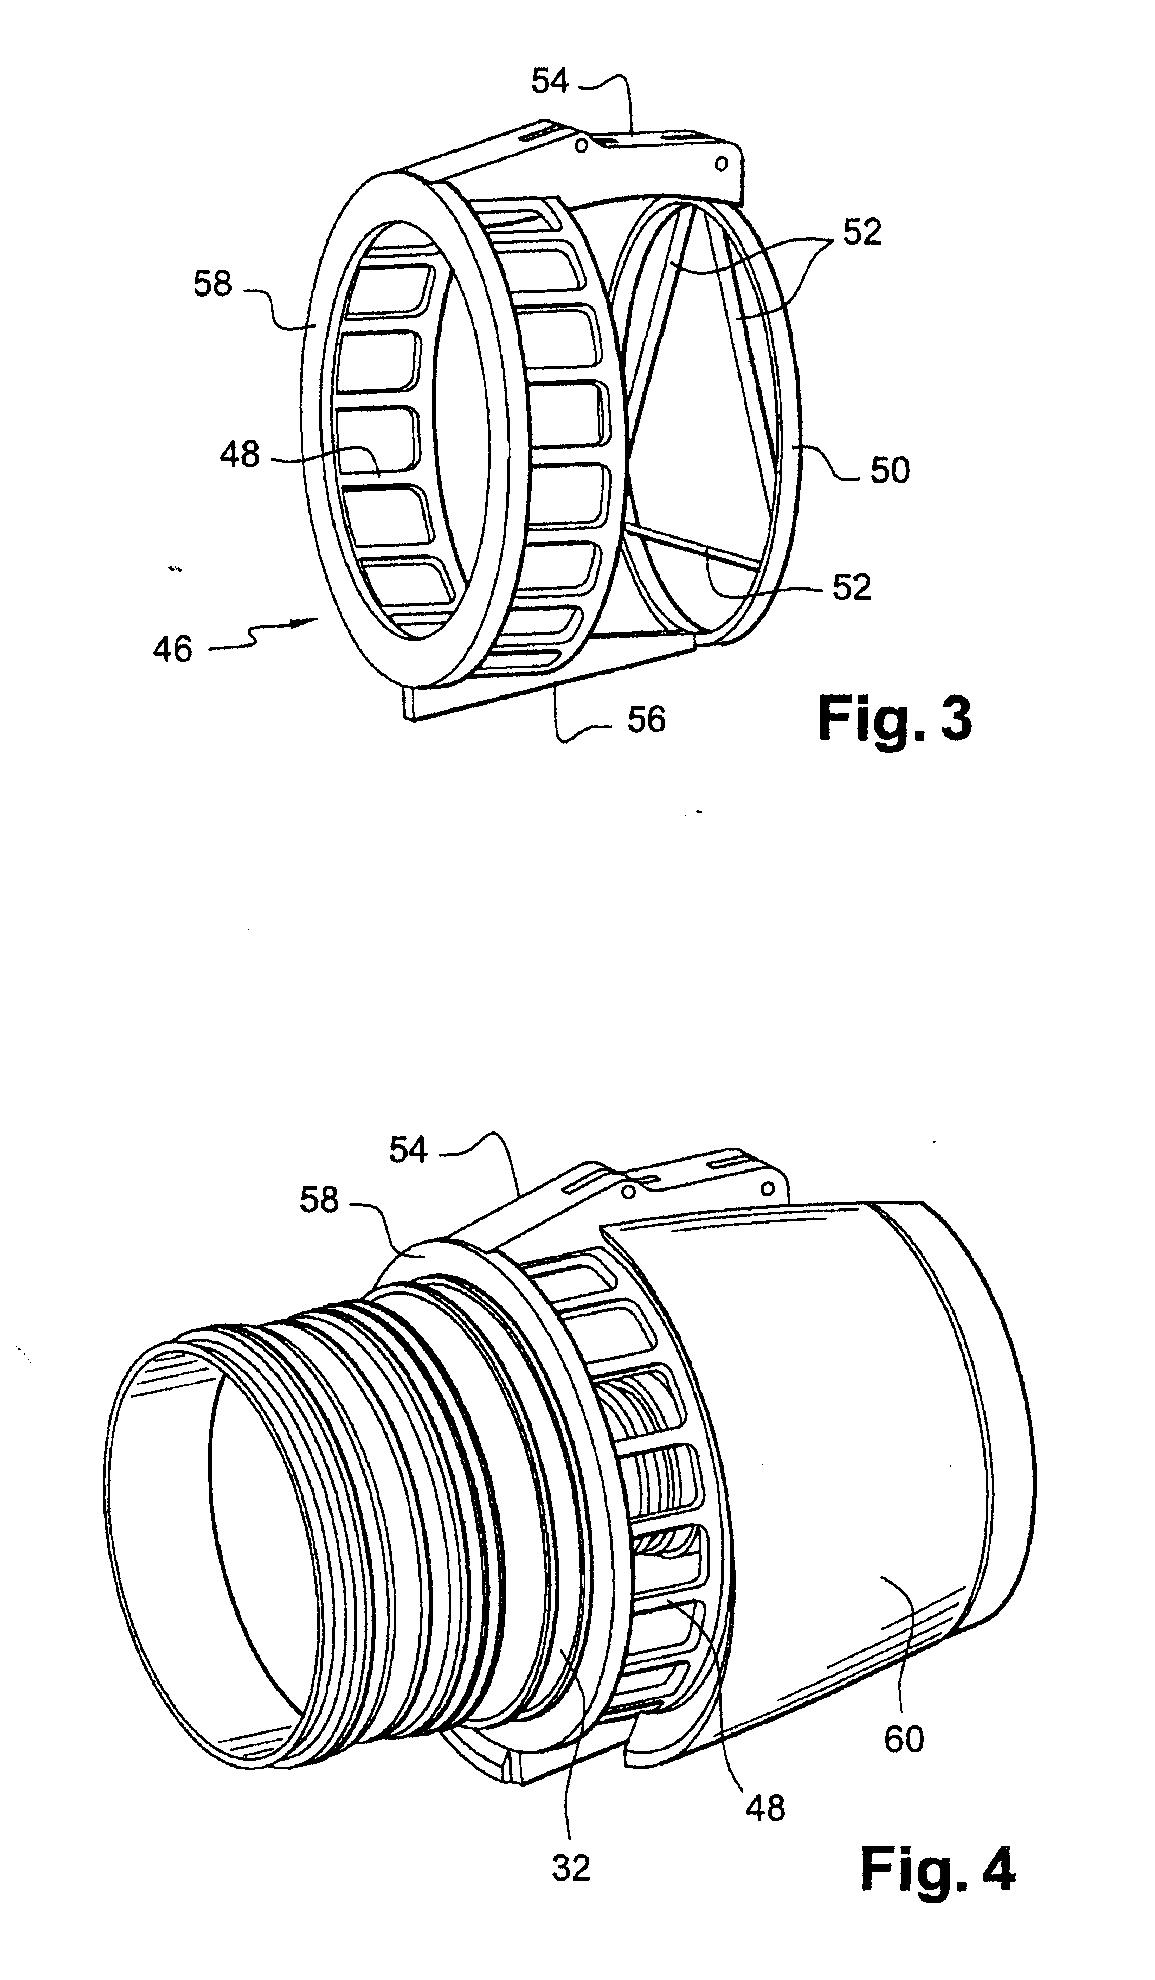 Propulsion system with integrated pylon